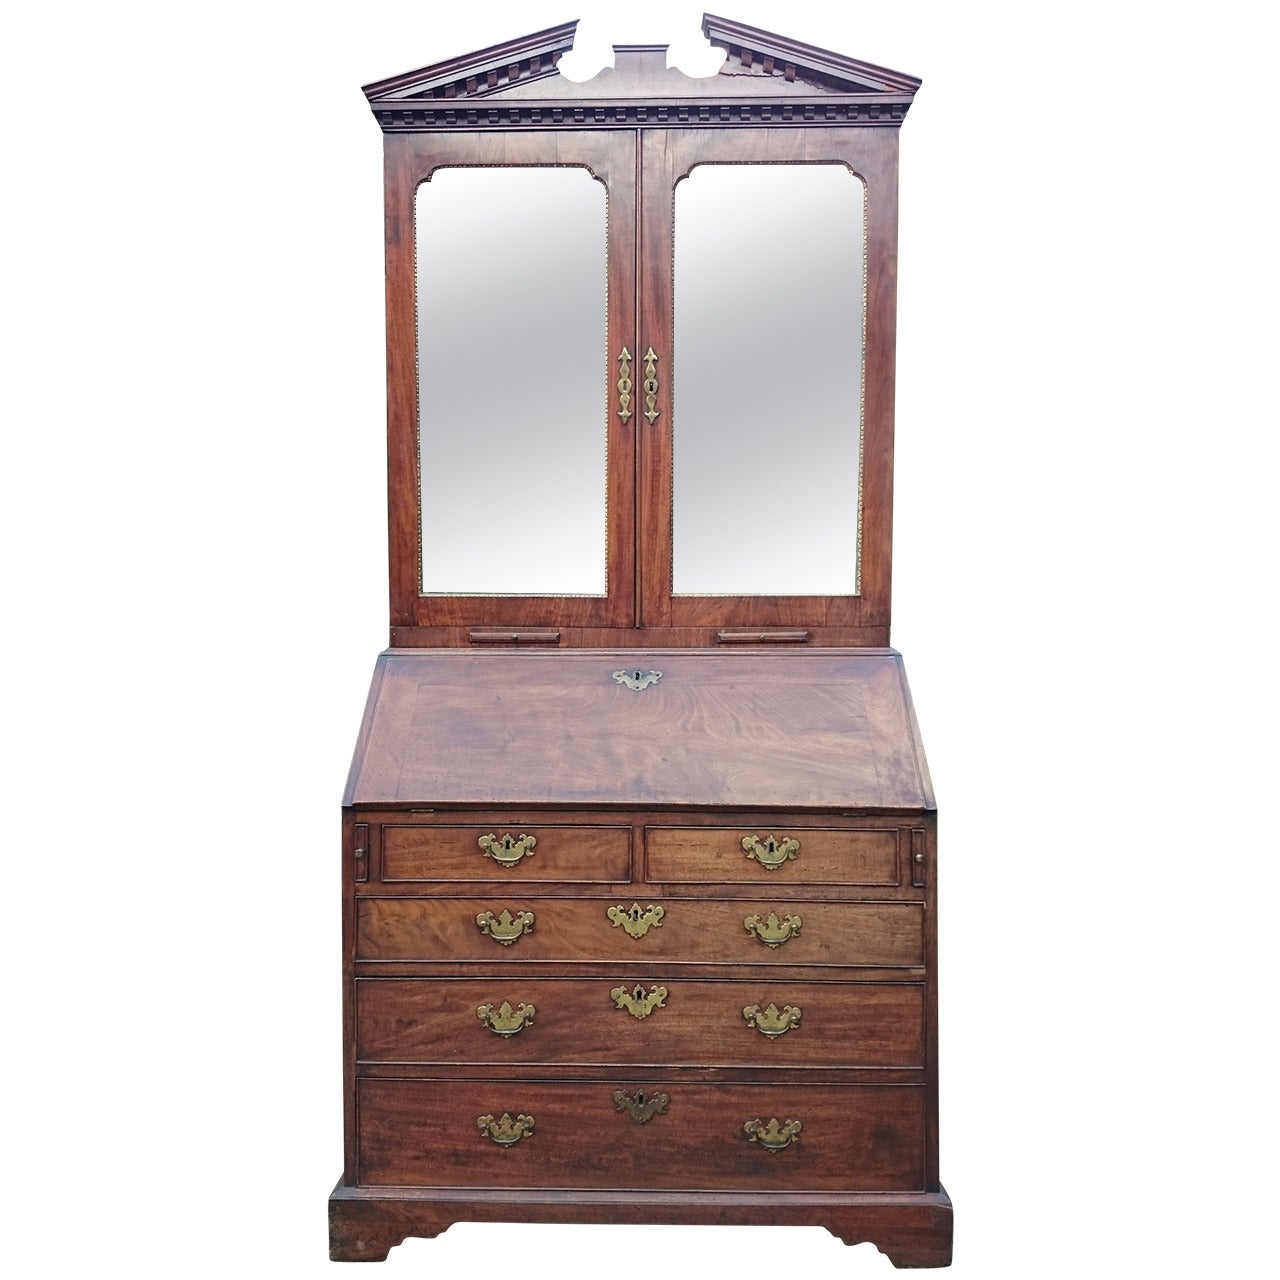 Early Antique Bureau Bookcase Made of Exceptional Mahogany For Sale